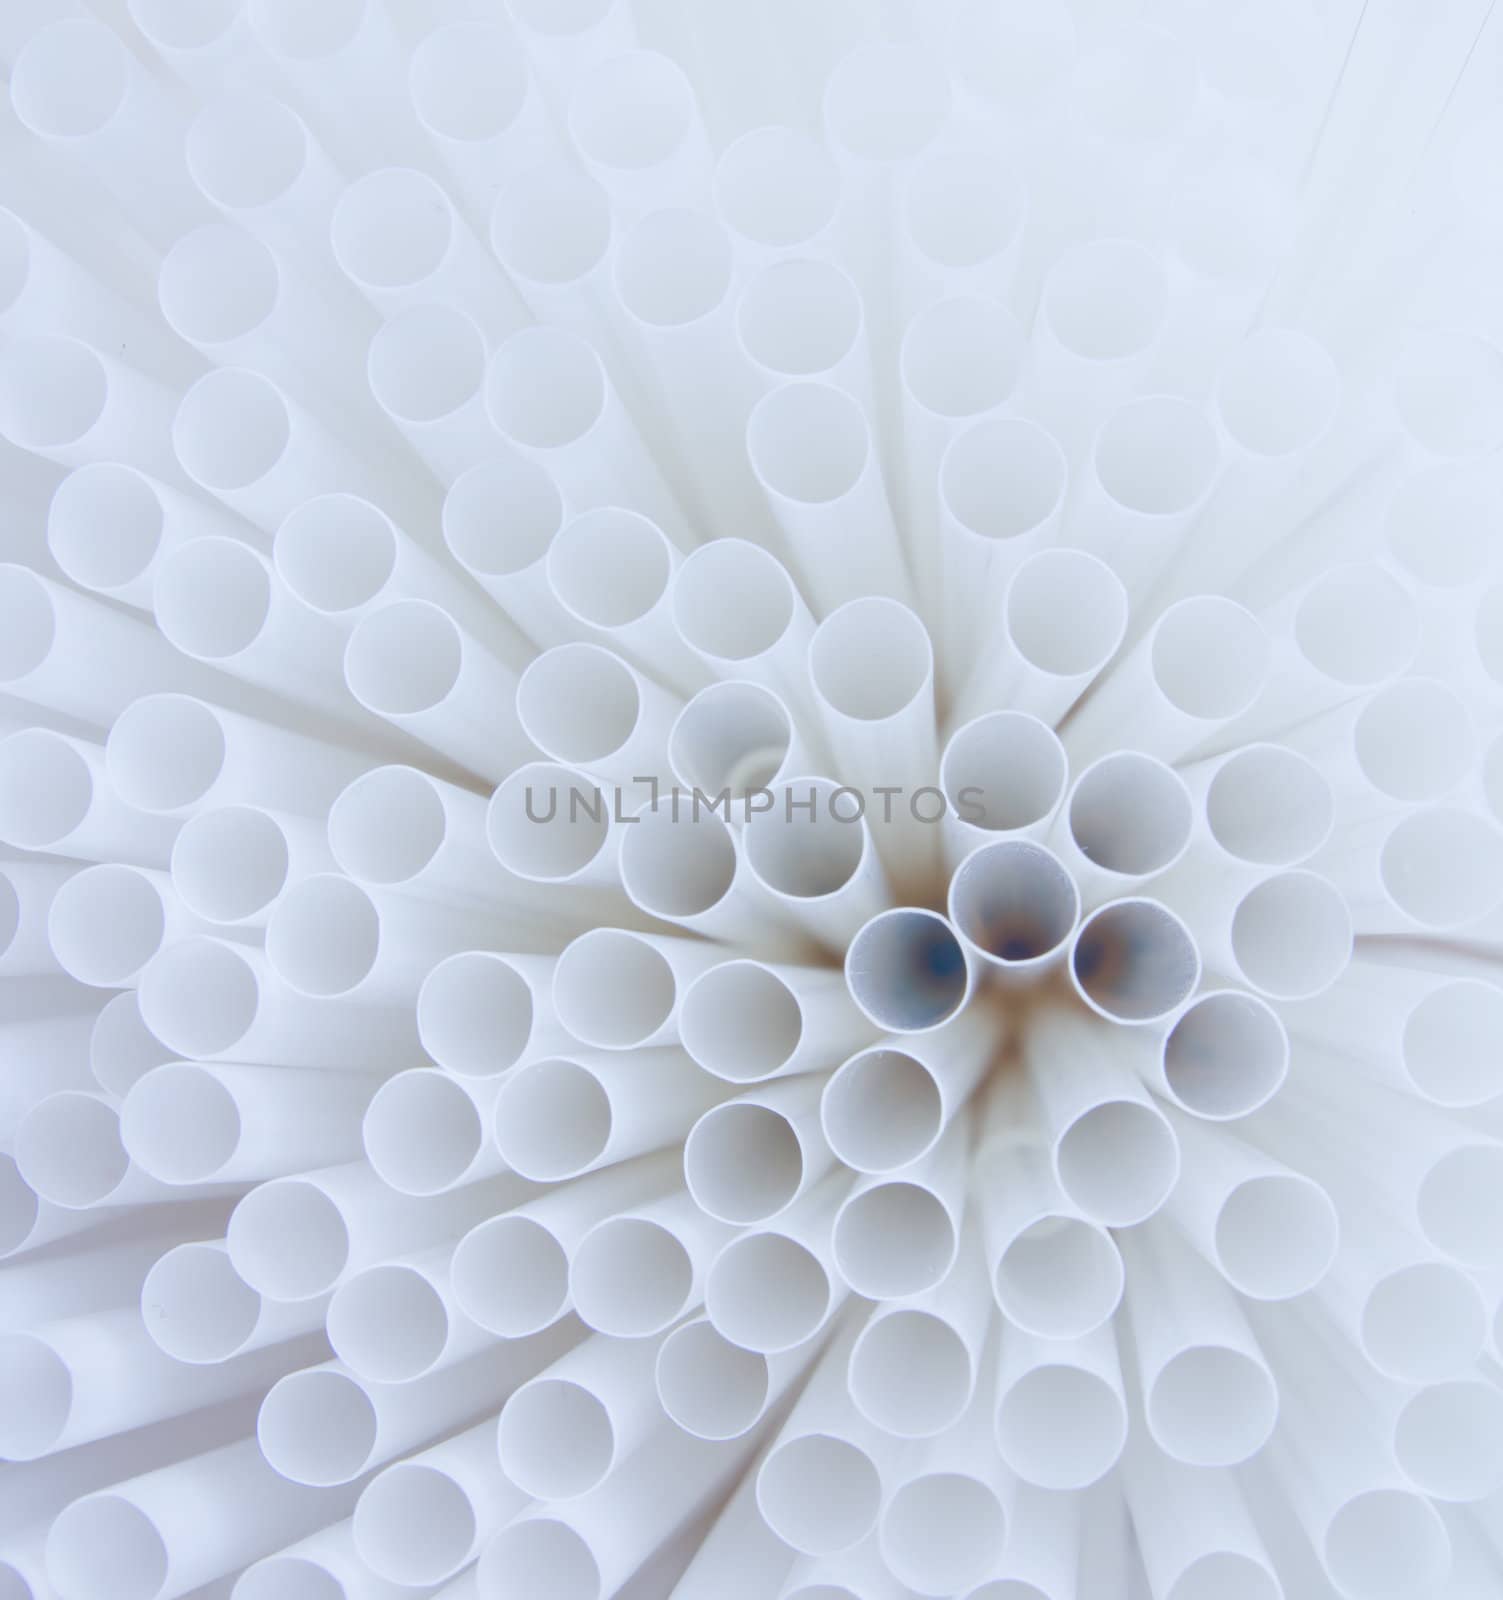 pattern of white straw for background by tungphoto